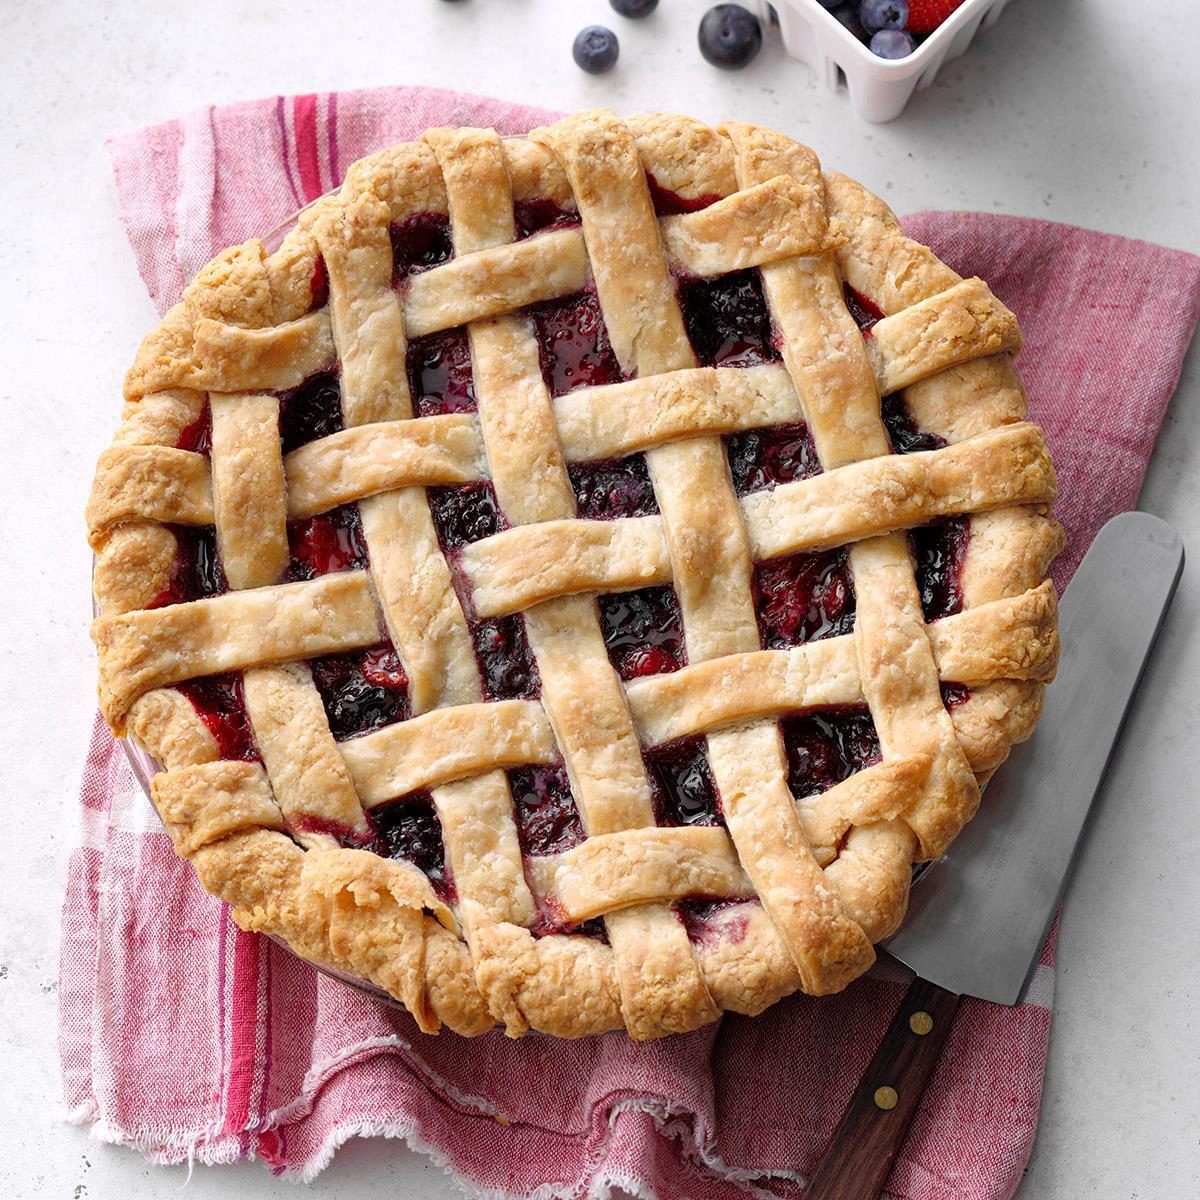 40 Berry Pie Recipes to Make This Summer | Taste of Home